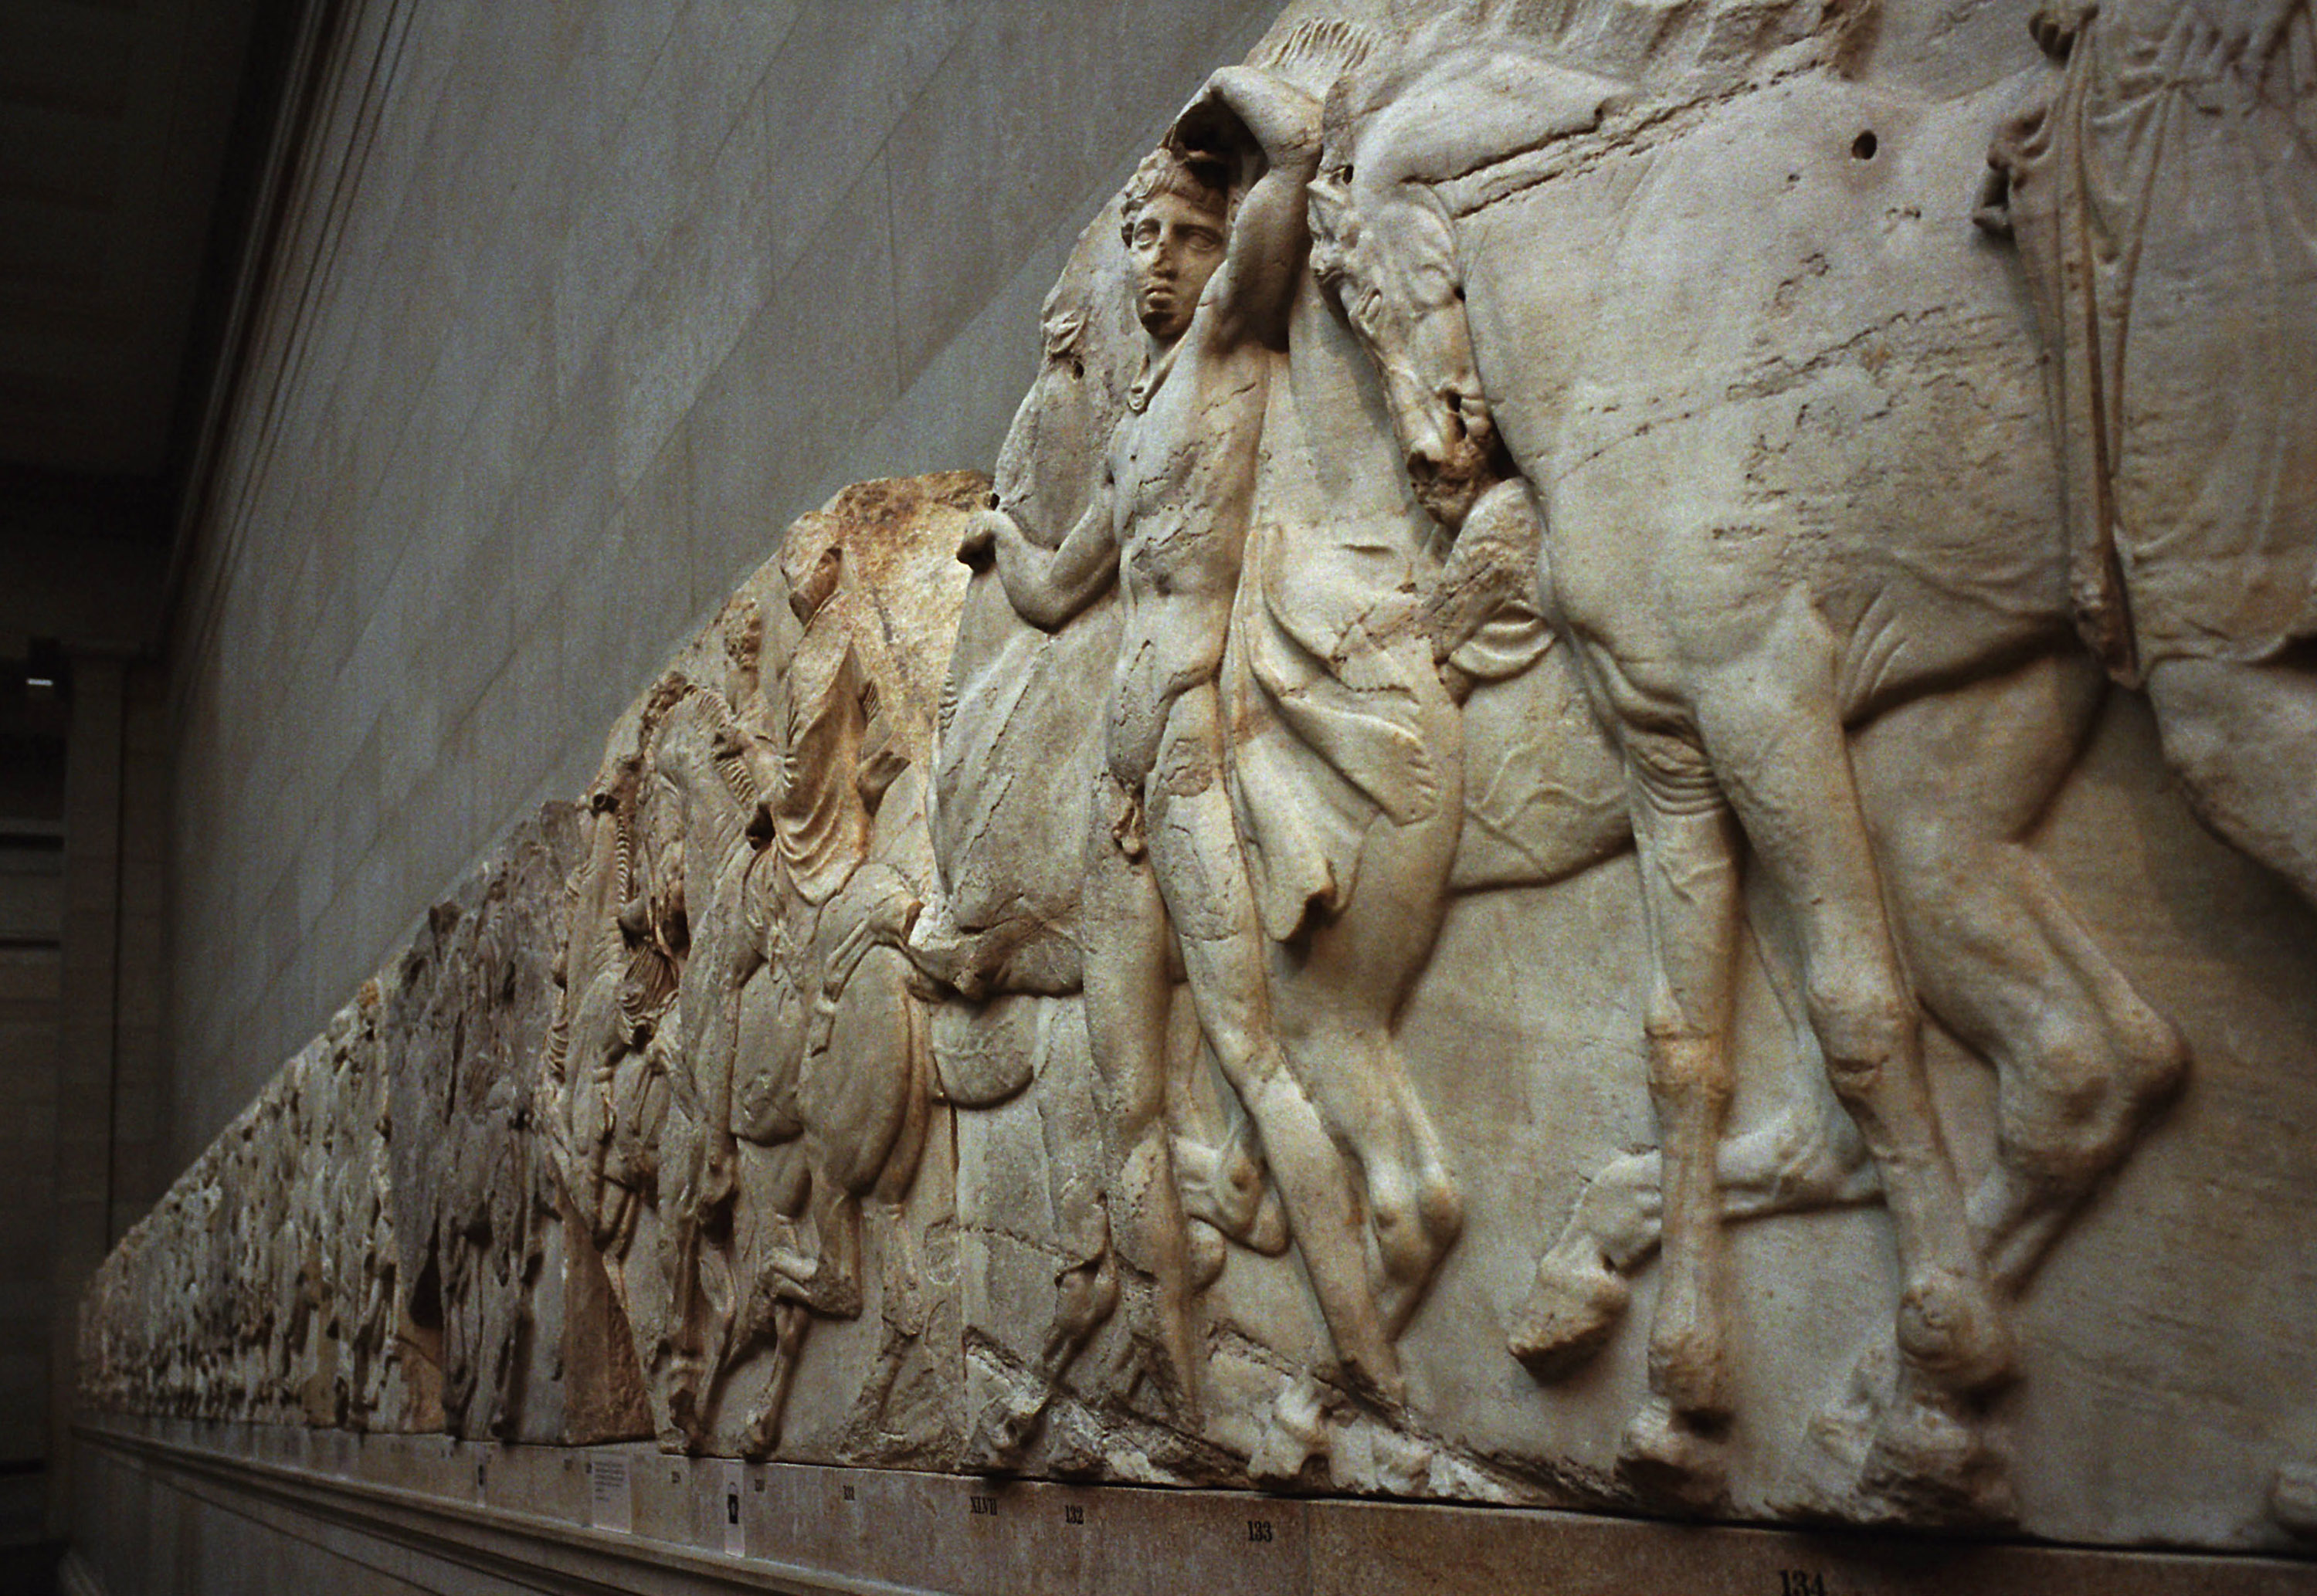 Sections of the Elgin Marbles at The British Museum in London.&nbsp;